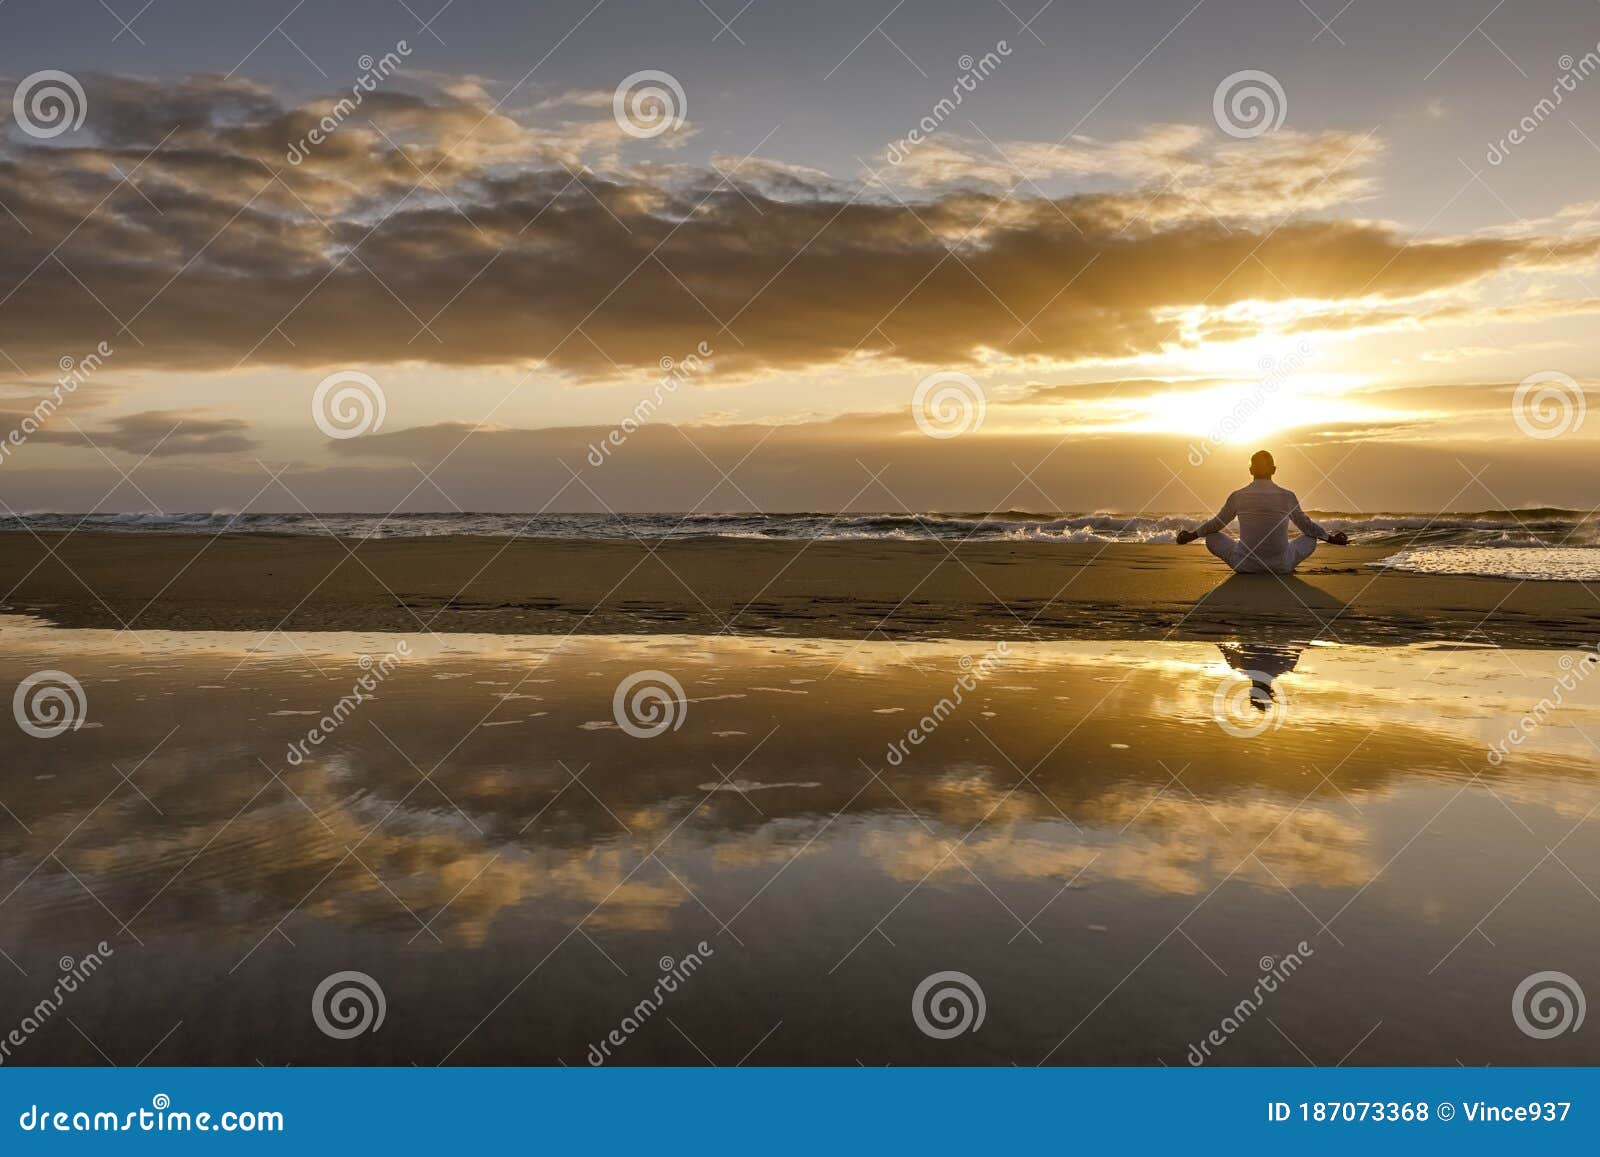 yoga meditation silhouette lotus sunrise beach, water reflection of man in yoga pose, mindfulness wellbeing concept